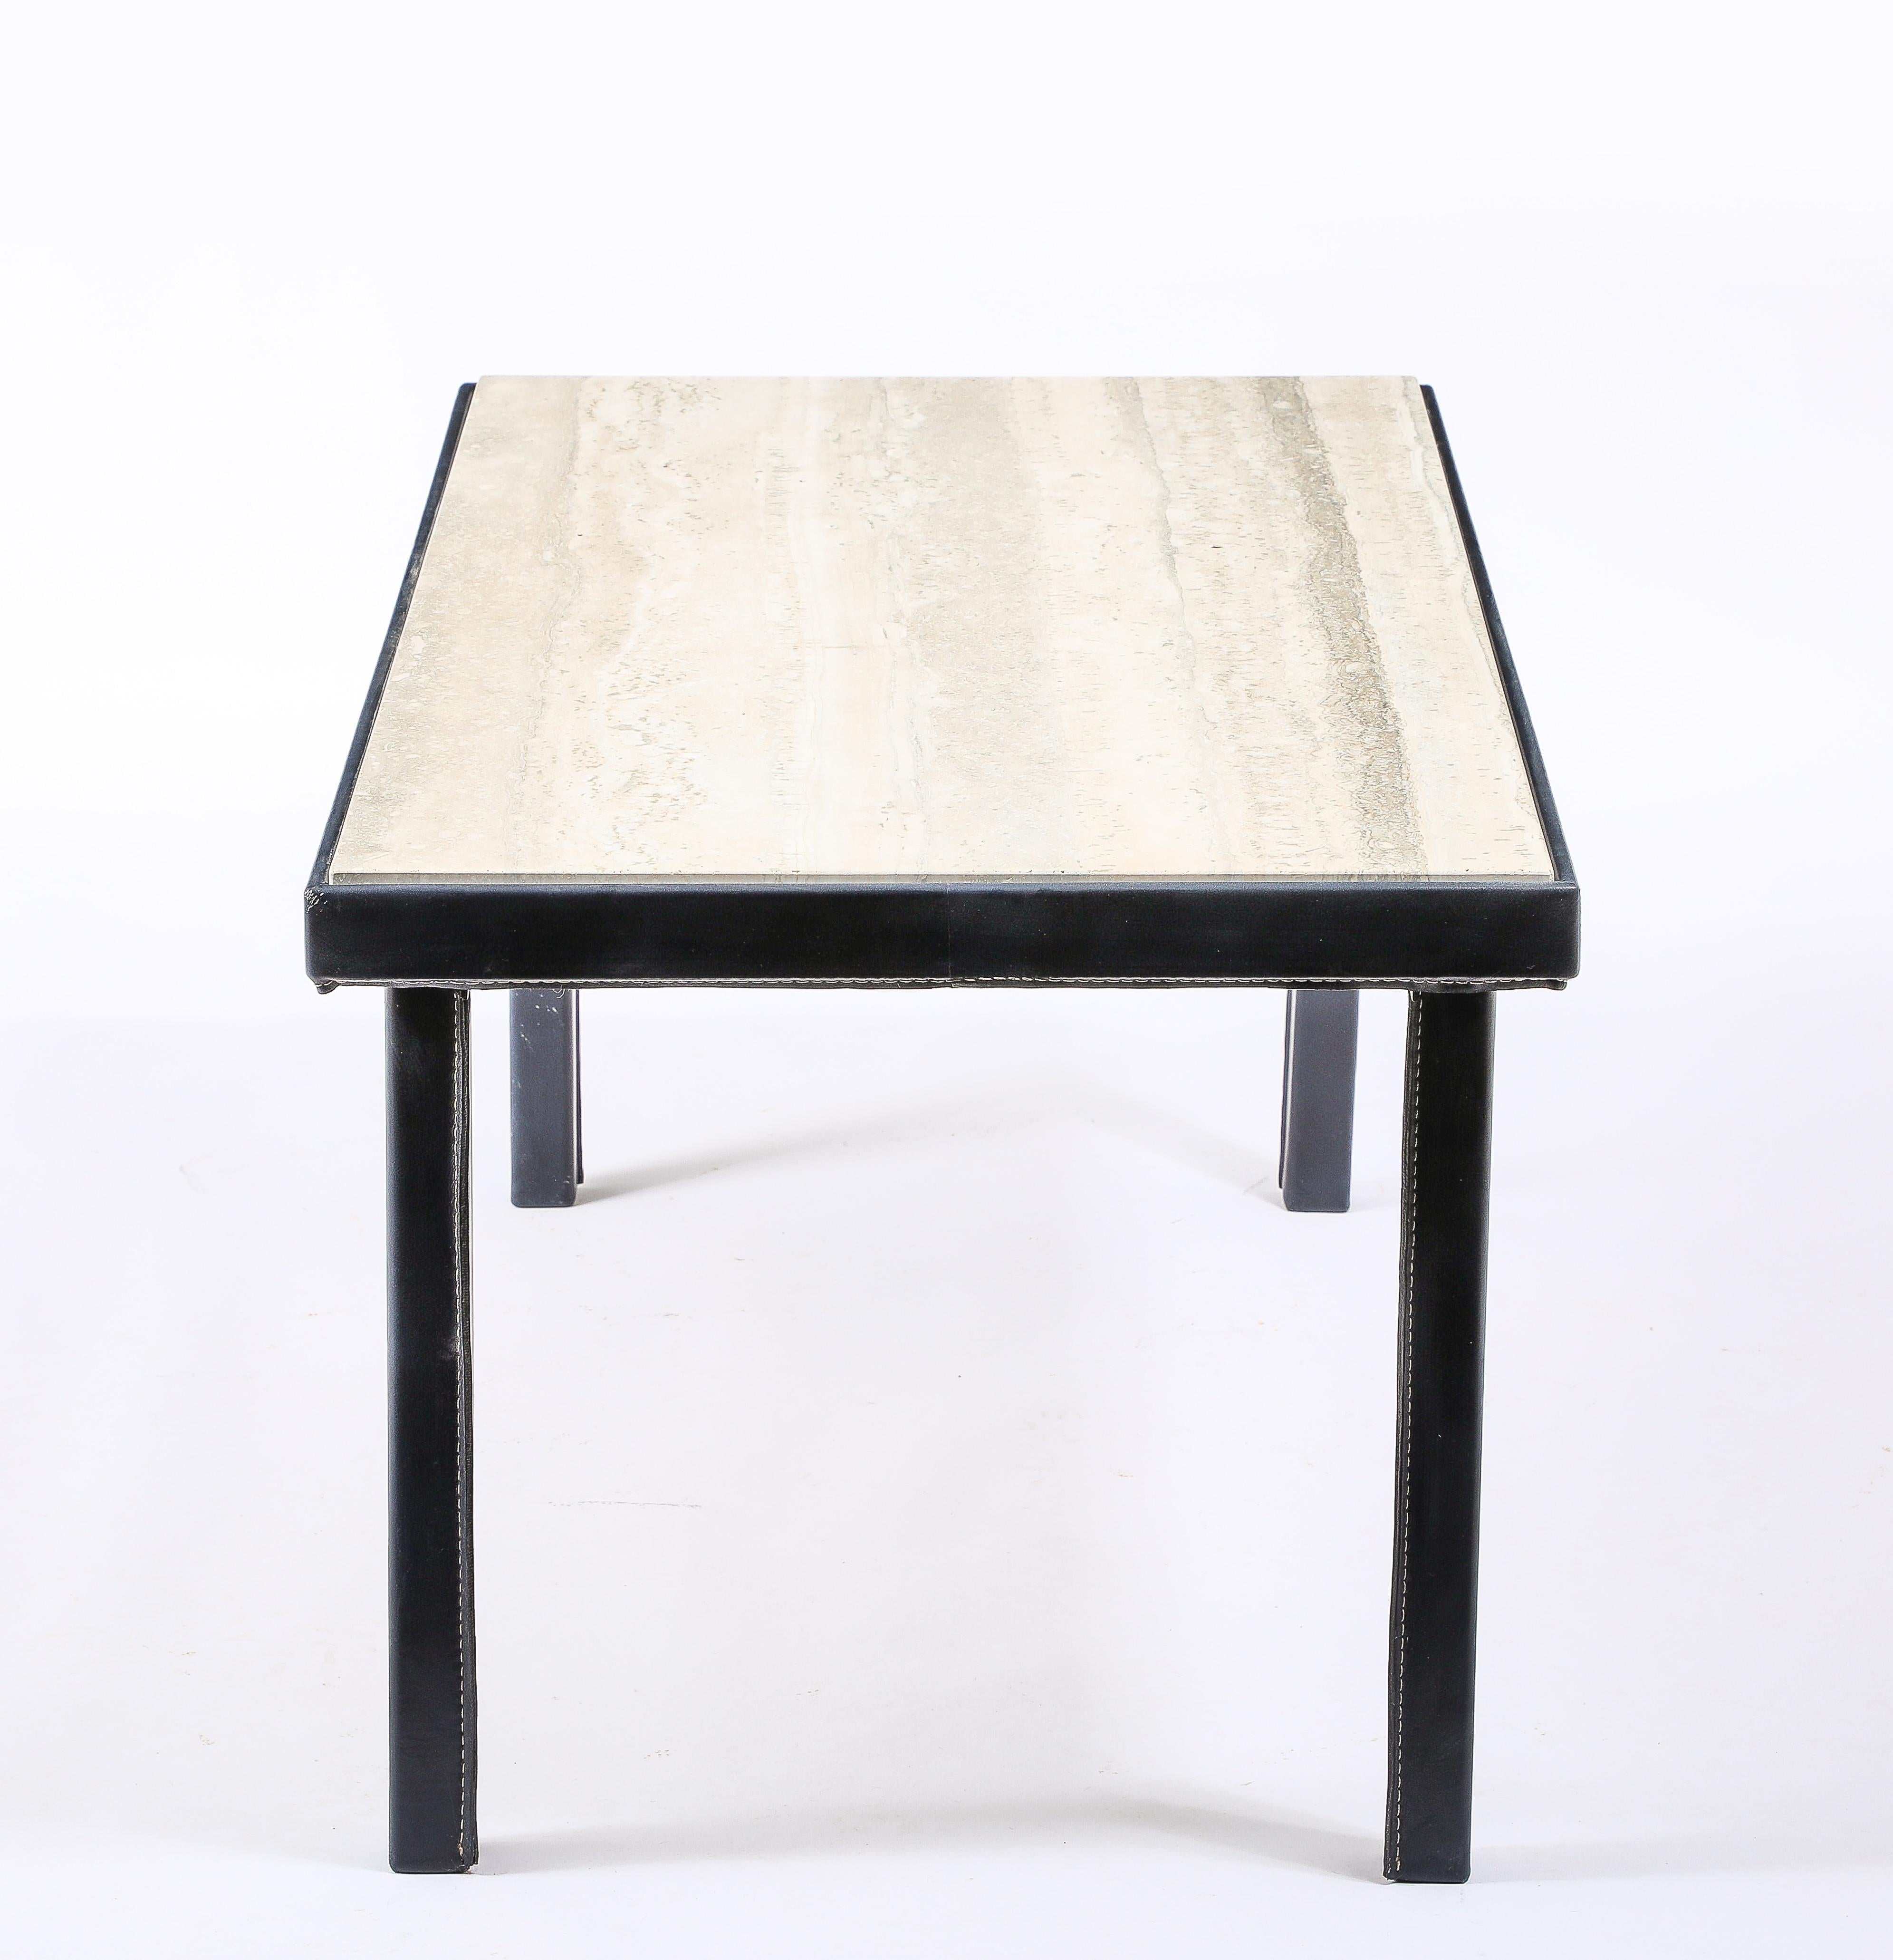 Stitched blue leather and travertine table in a simple yet elegant and handsome form, each leg stitched at the inward angle and the apron stitched in the bottom with the travertine rising slightly from the frame.
